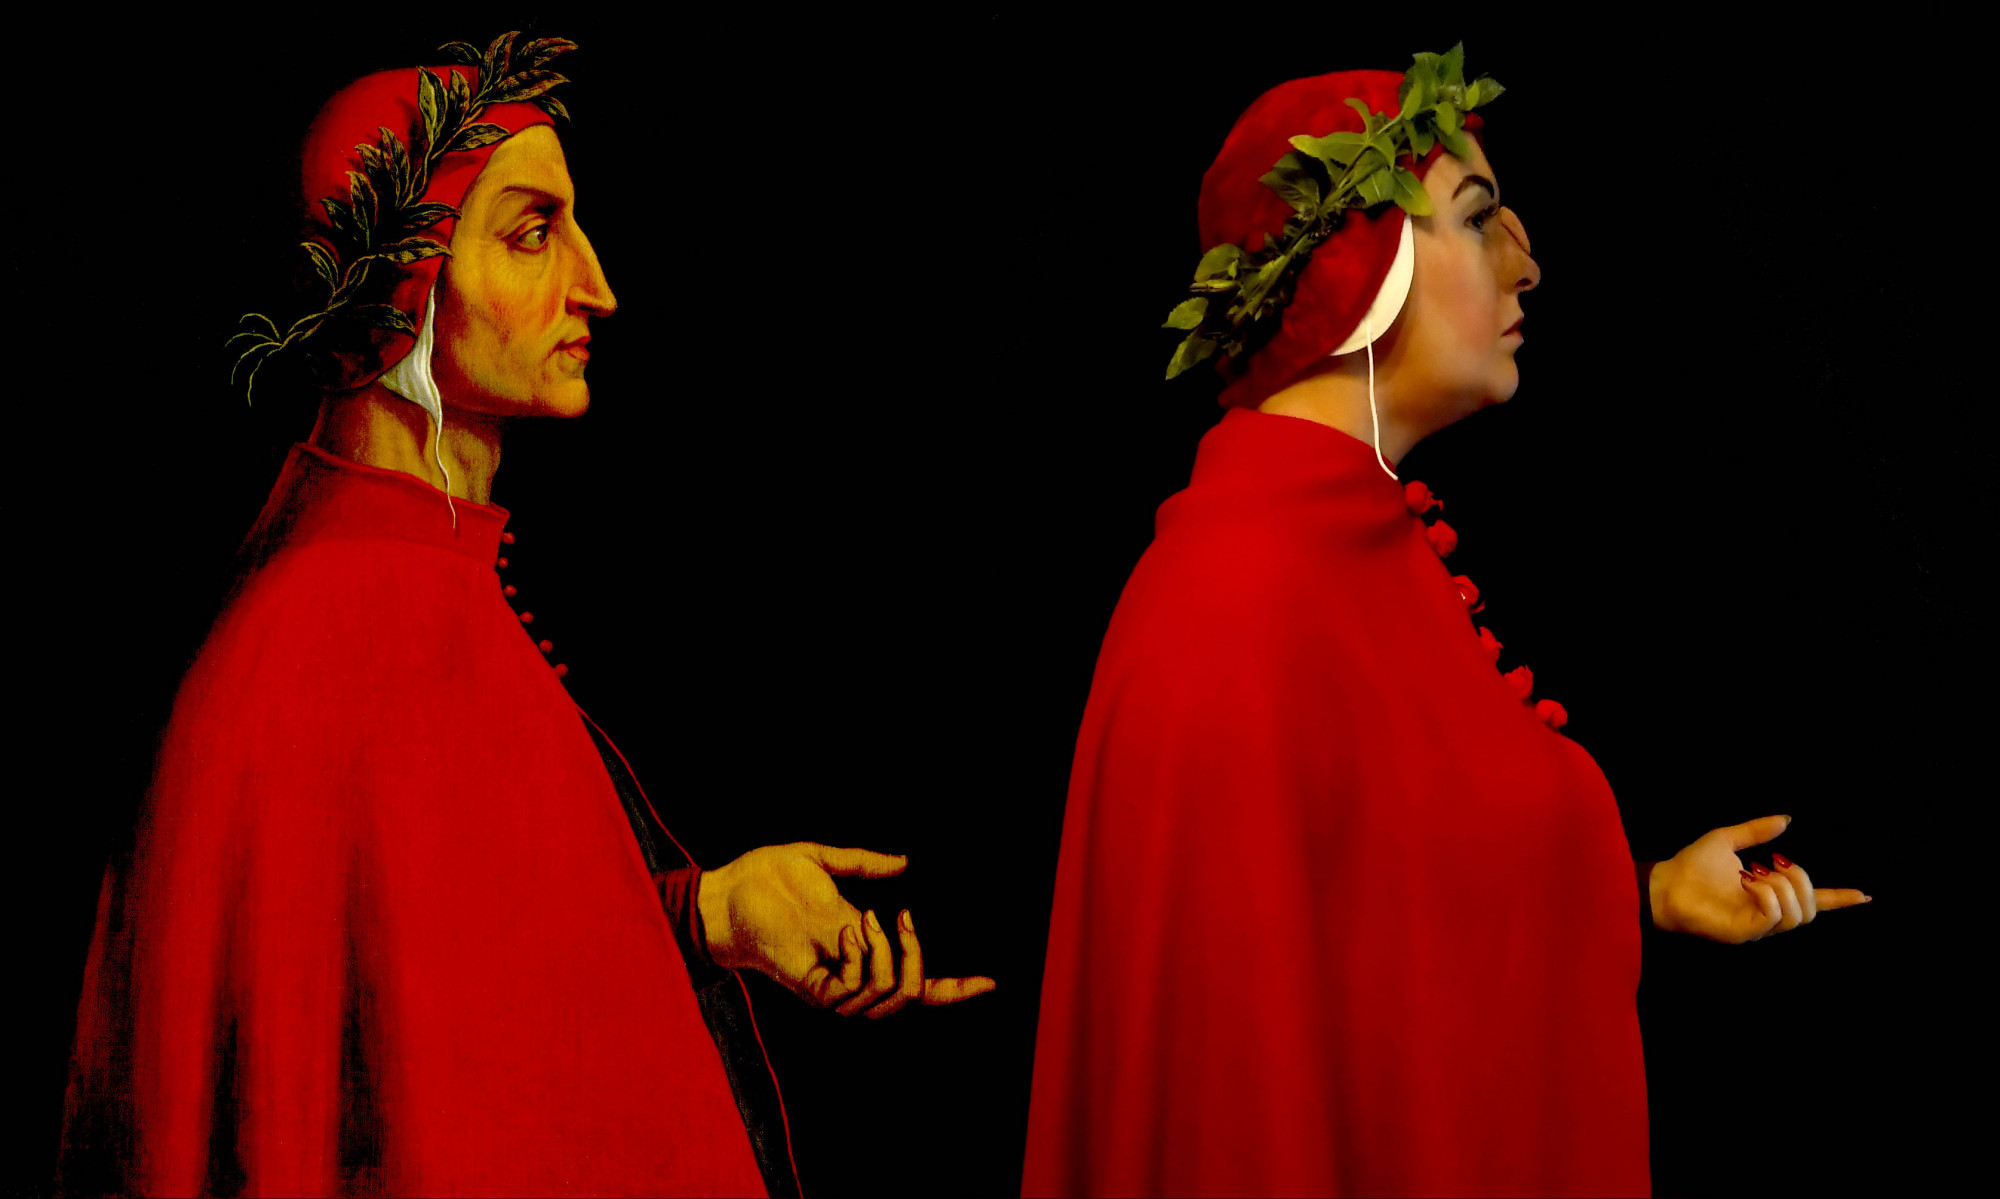 The portrait of Dante Alighieri in the style of the Italian school of the 15th/16th century from the collection of Ambras Castle (artist unknown).